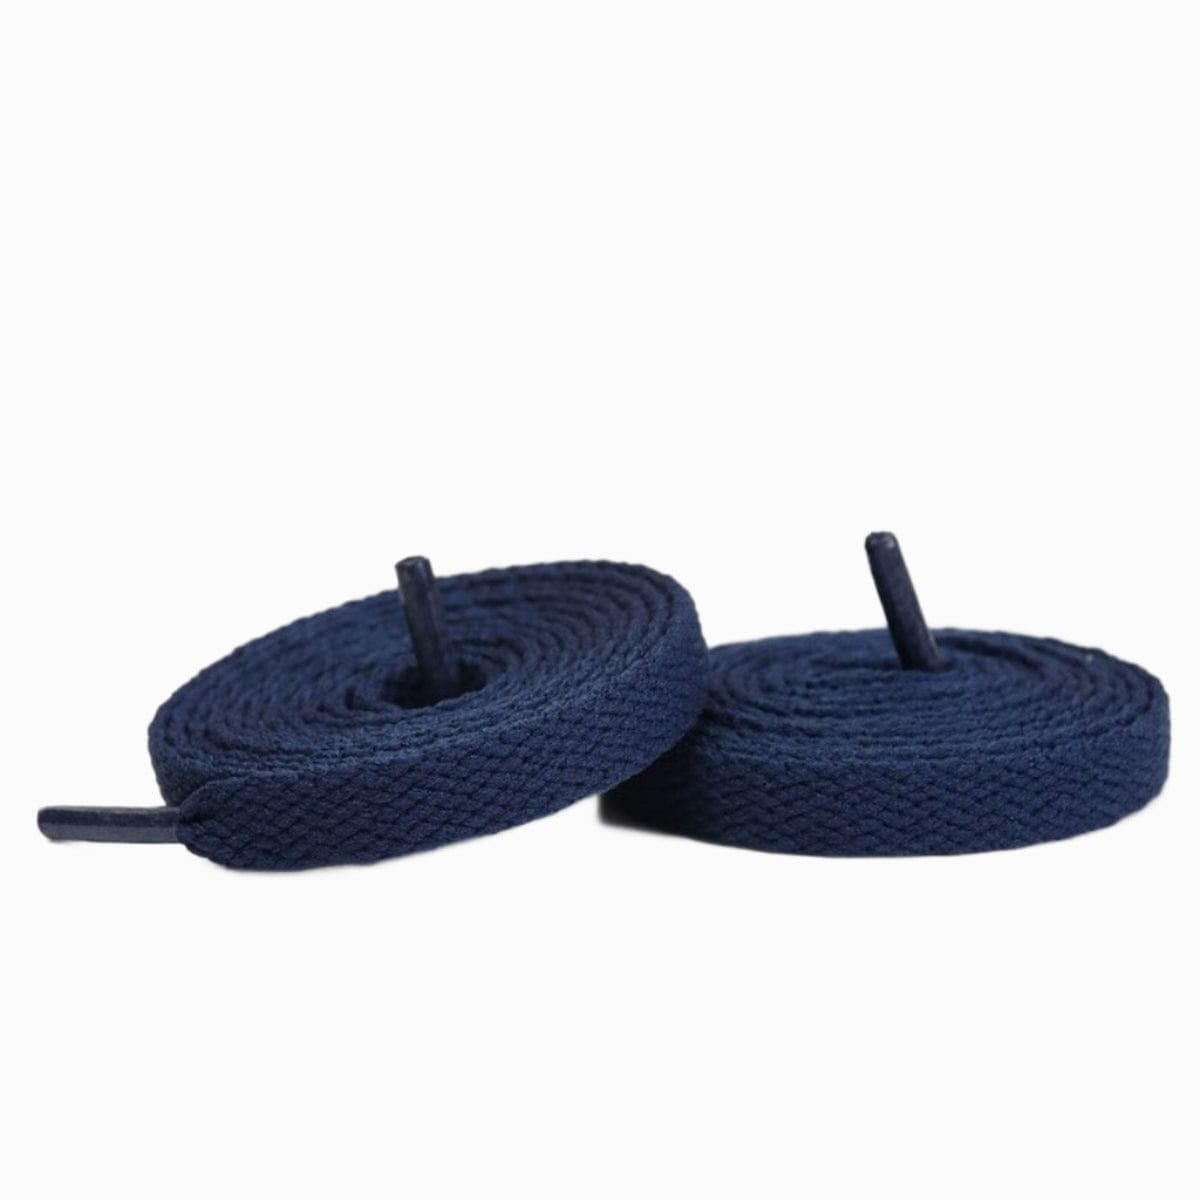 Dark Blue Replacement Adidas Shoe Laces for Adidas Handball Spezial Sneakers by Kicks Shoelaces